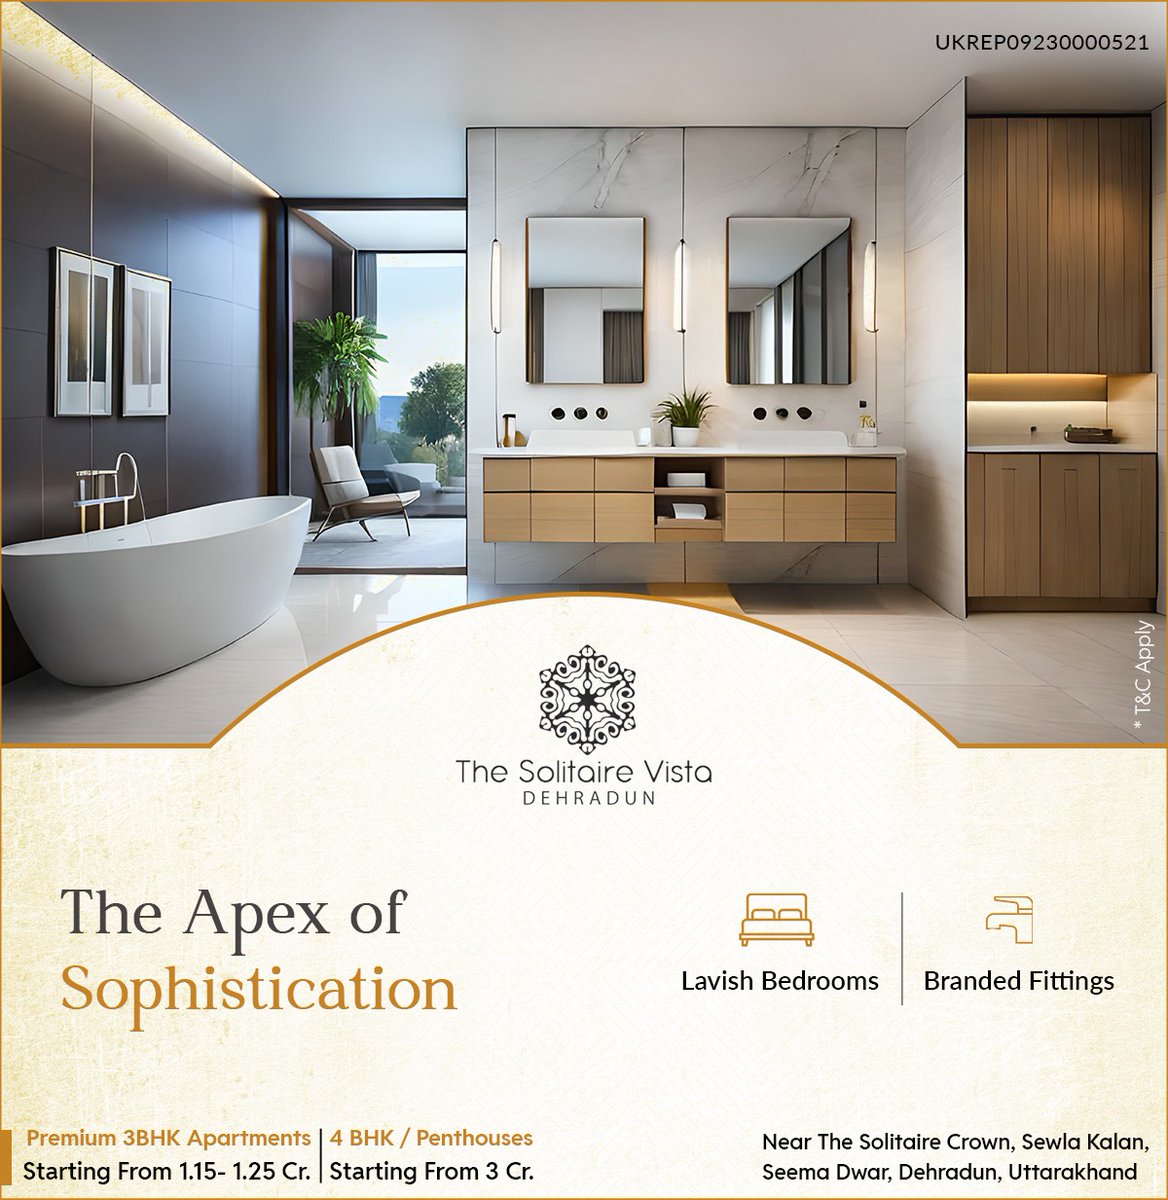 Where sophistication reigns supreme and luxury finds its true essence.  

🔹Premium 3 BHK Apartments Starting From 1.15 Cr.   
🔹4 BHK/ Penthouses Starting From 3 Cr.  

#MaxvelGroup #TheSolitaireVista #LuxuryLiving #RealEstate #LuxuryHomes #LuxuryRealEstate #HighEndLiving